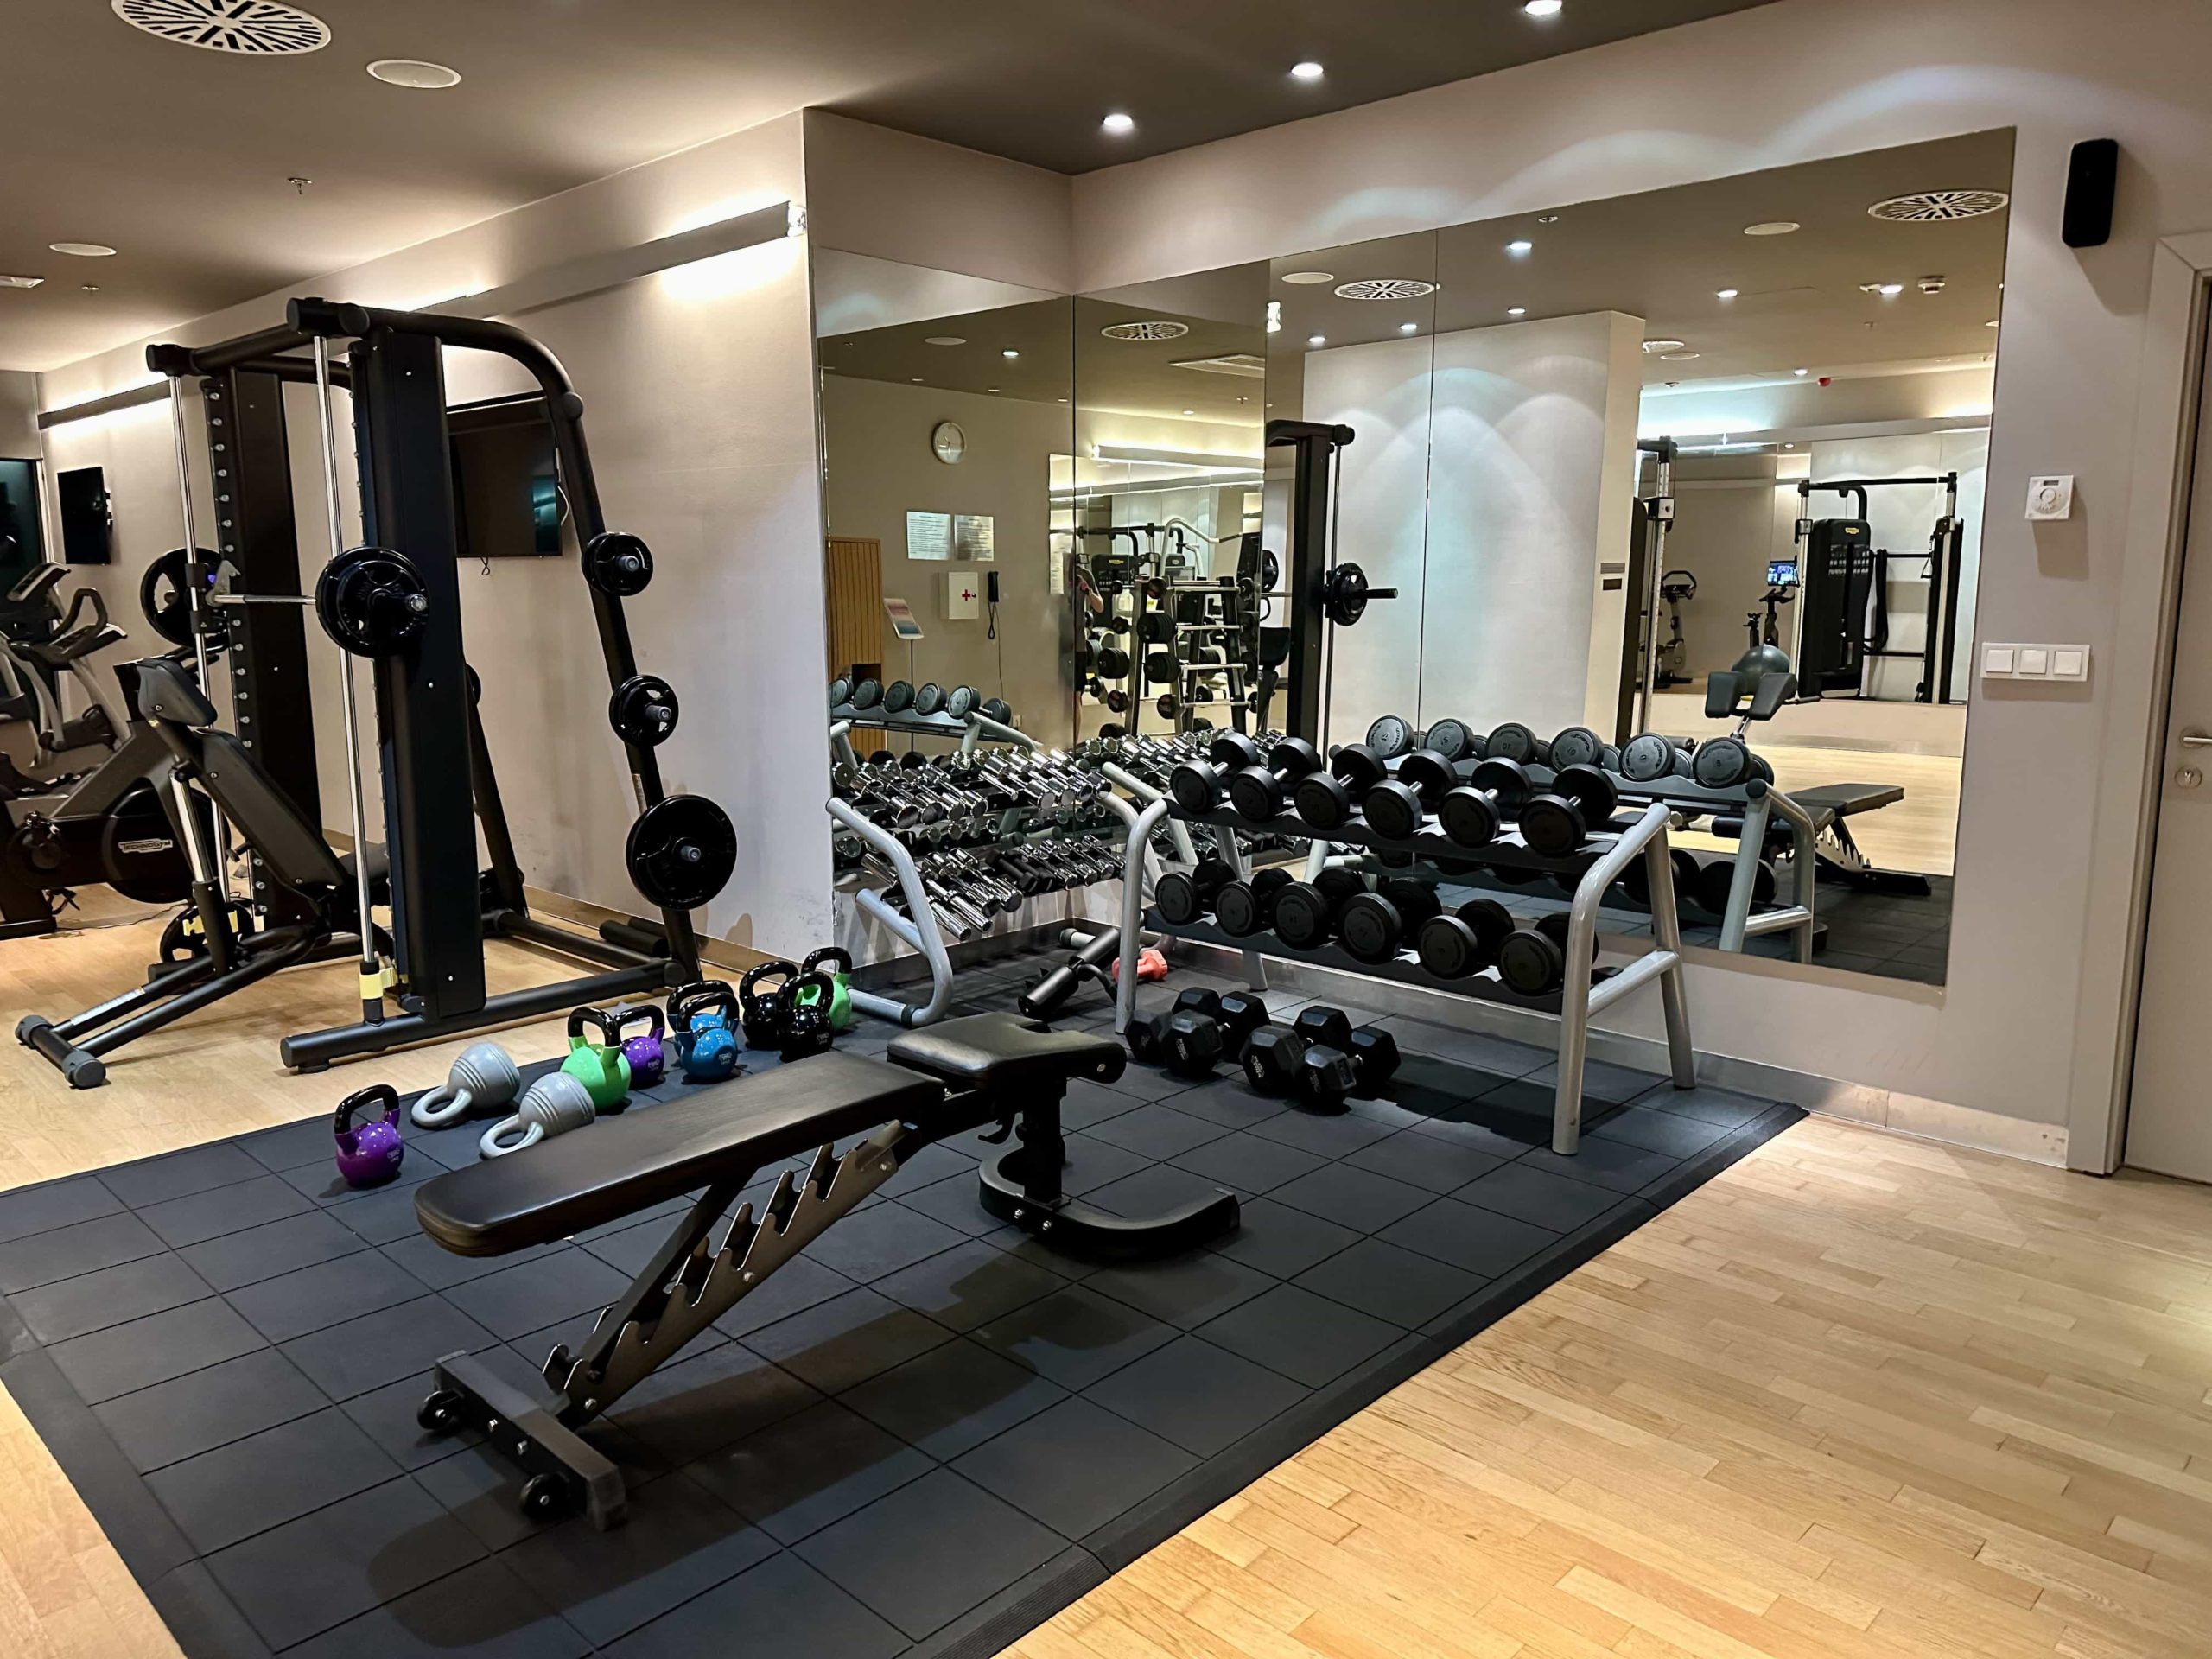 A gym equipped with  barbells, kettlebells, dumbbells, and weight machines